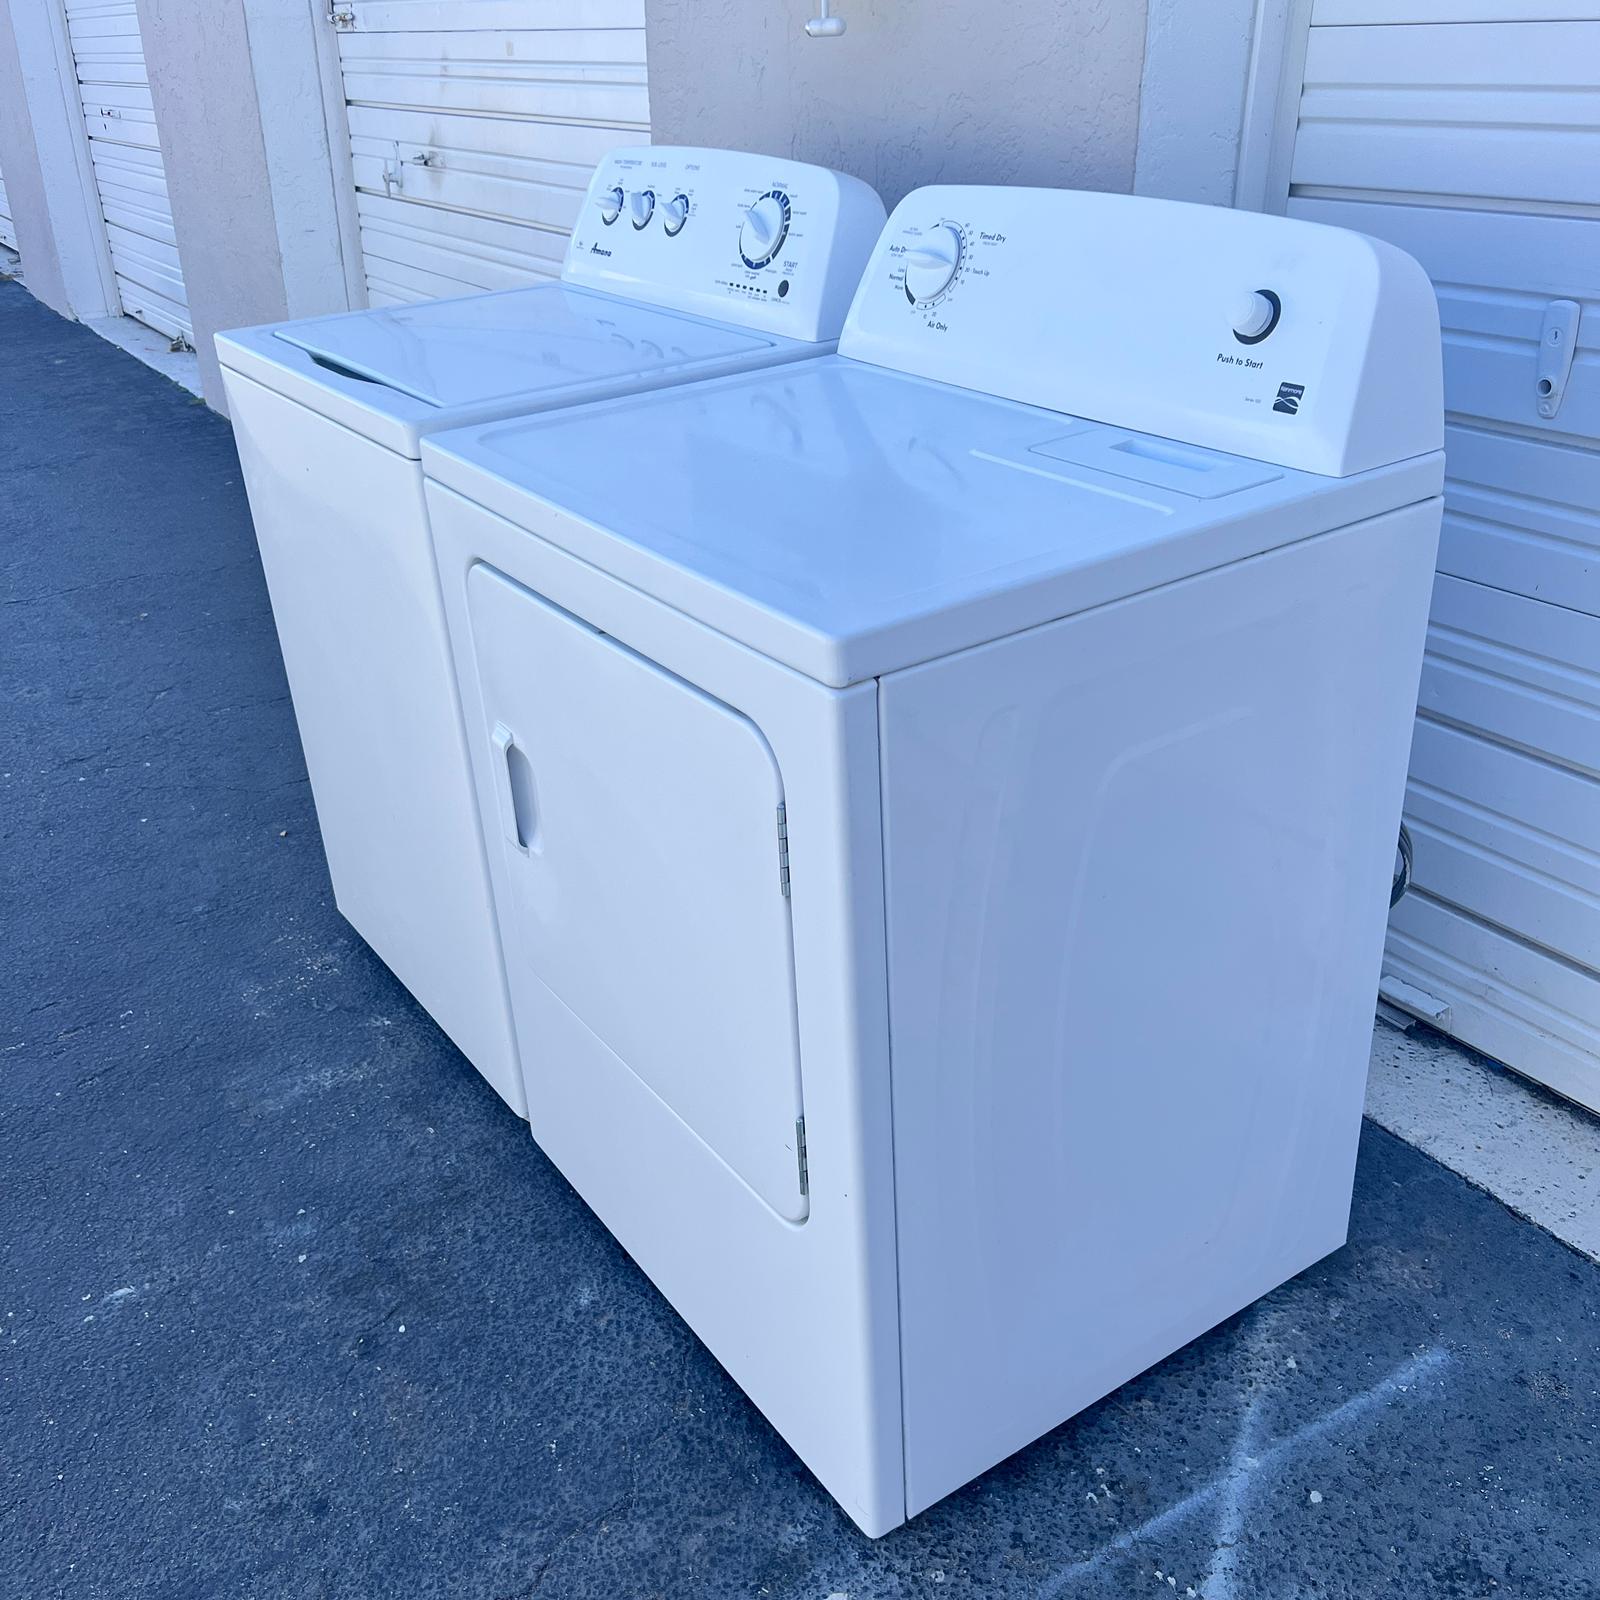 Amana Washer and Kenmore Dryer Set